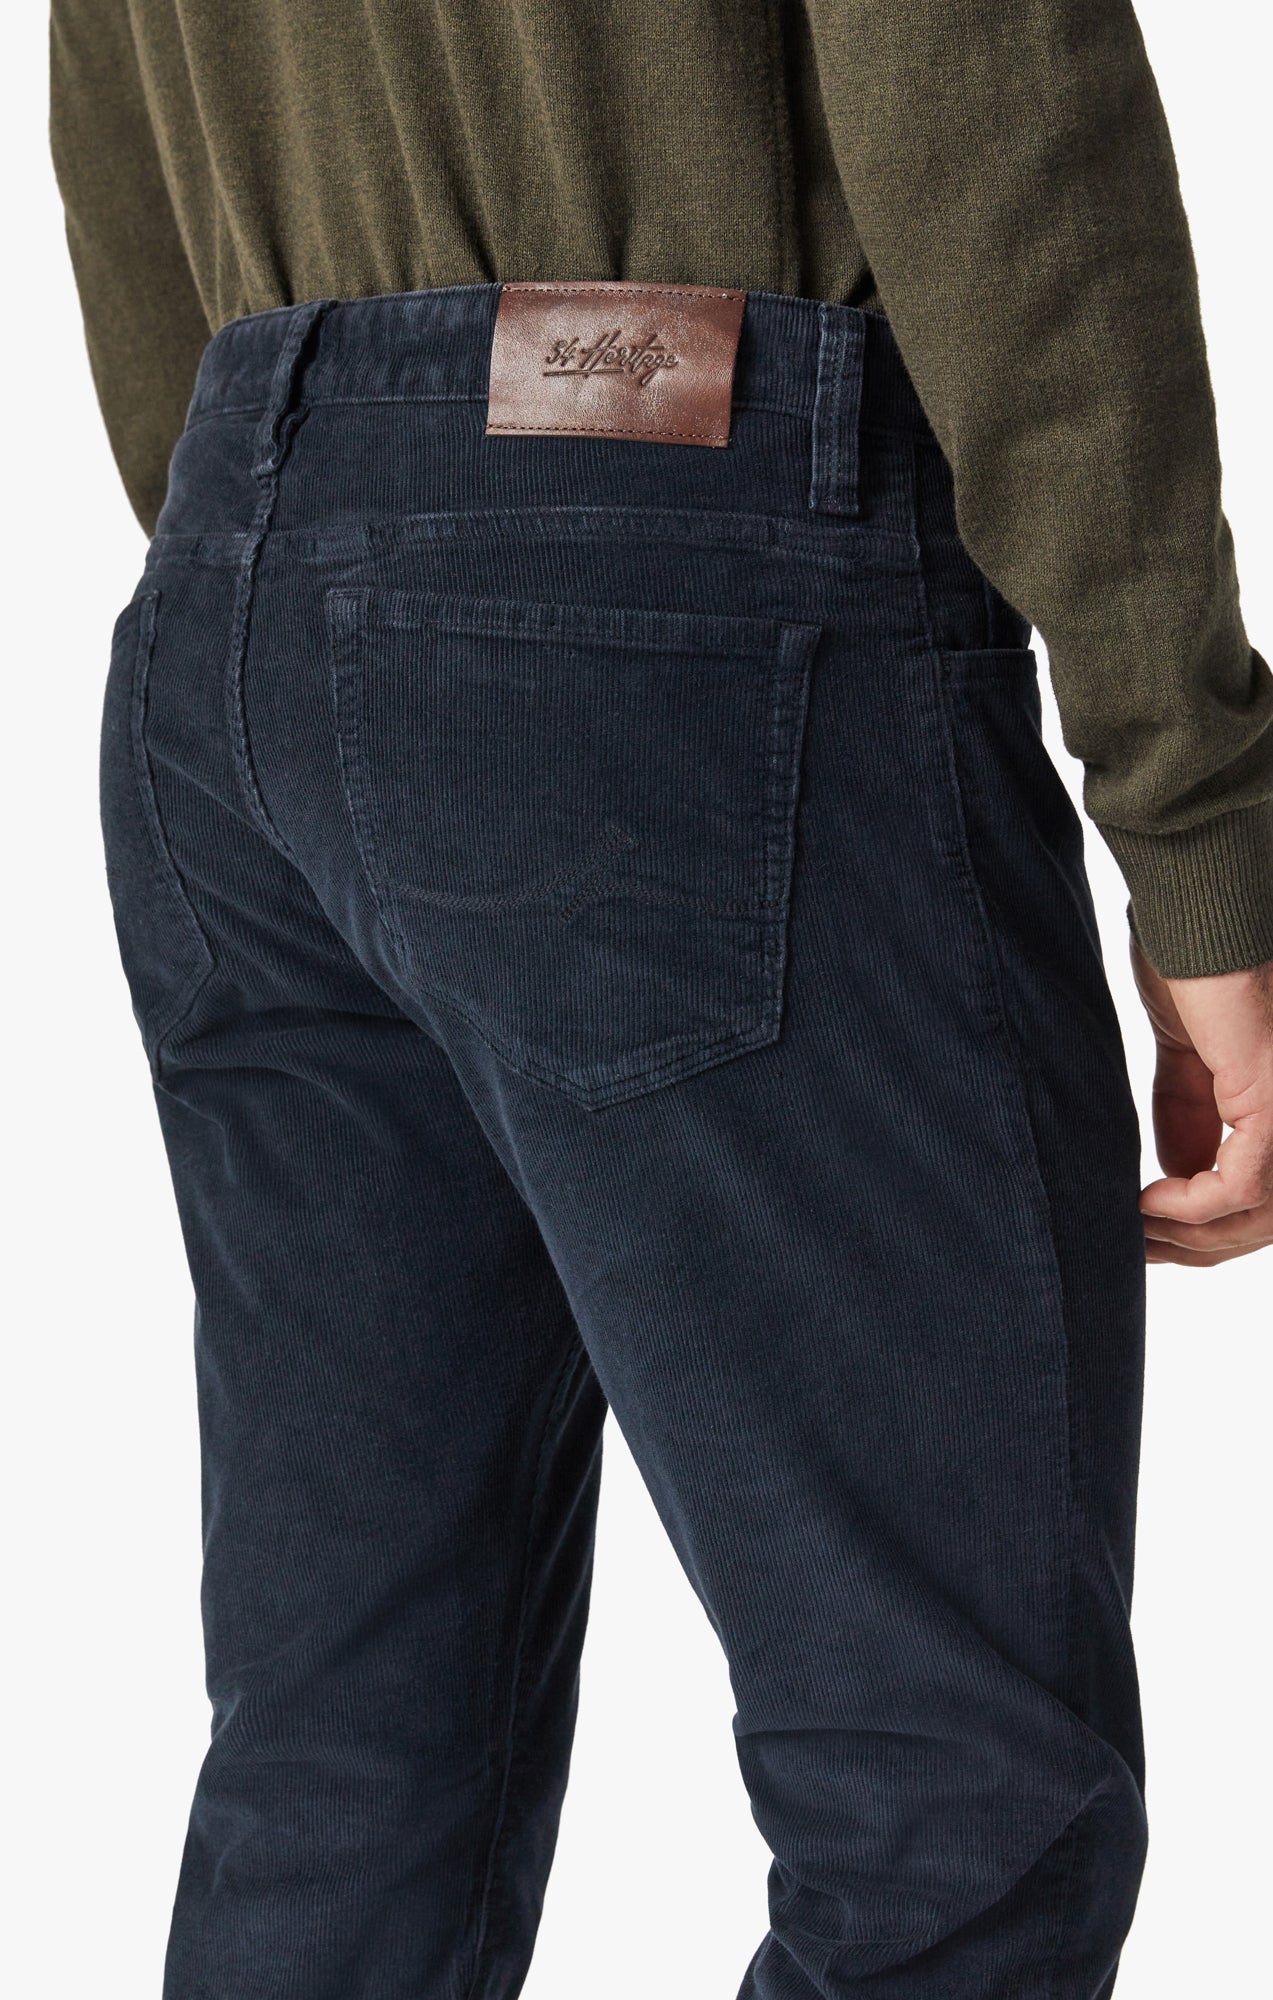 Cool Tapered Leg Pants In Navy Cord Image 5